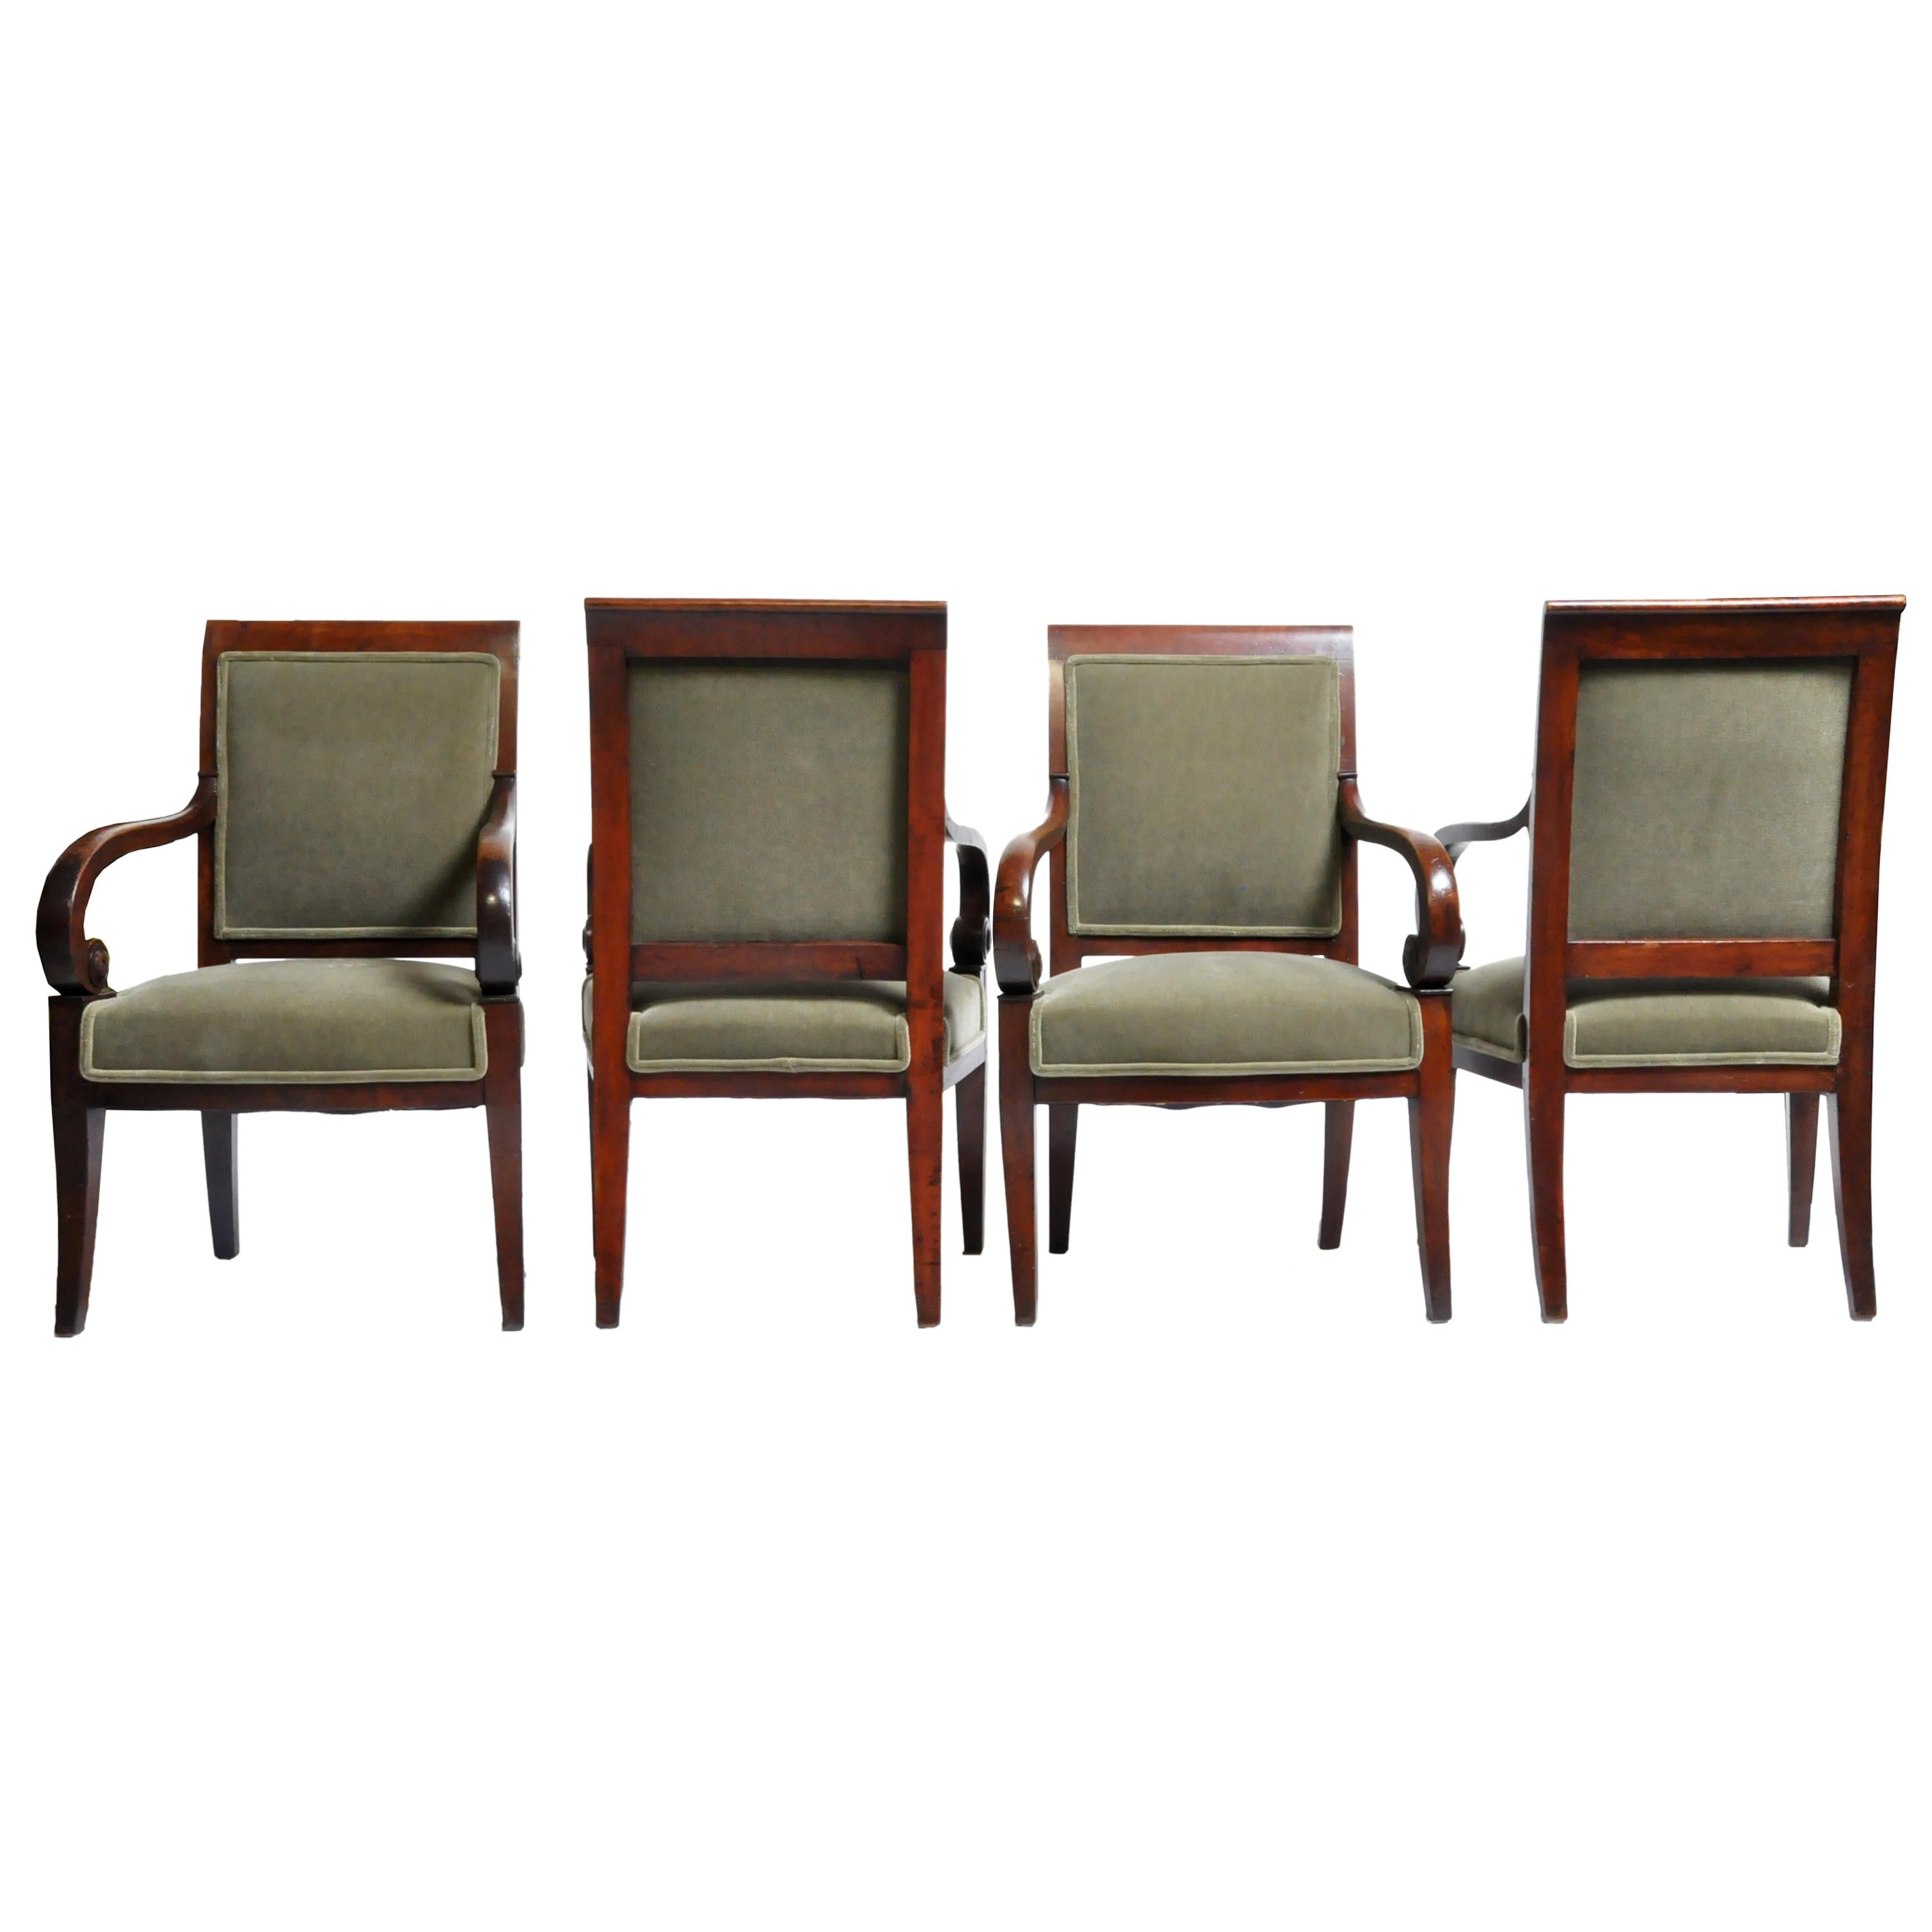 Set of Four Empire Period Armchairs